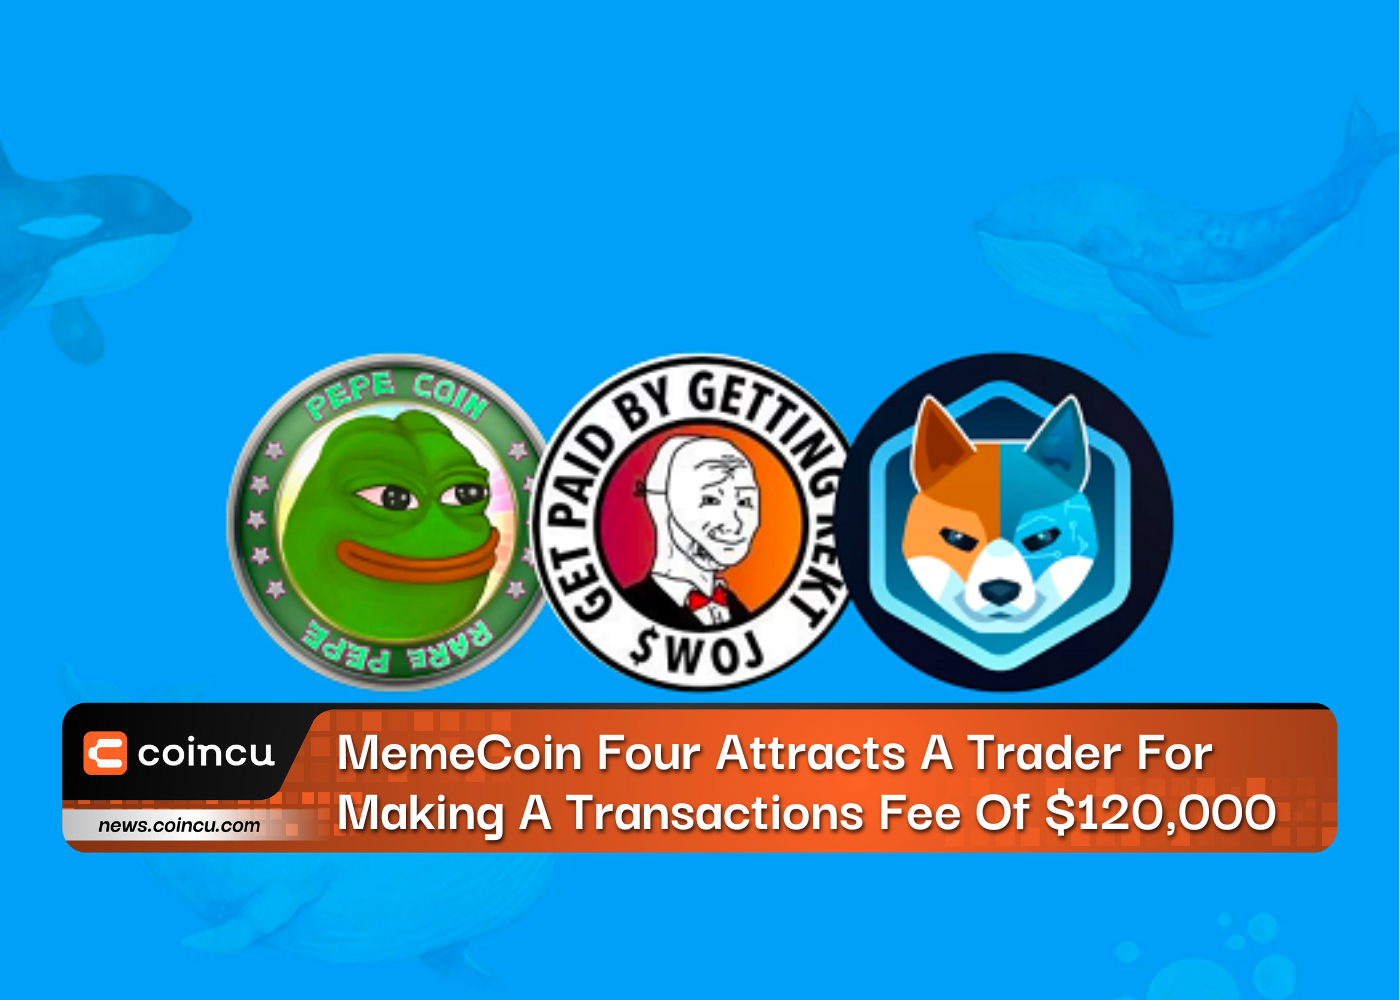 MemeCoin Four Attracts A Trader For Making A Transactions Fee Of $120,000